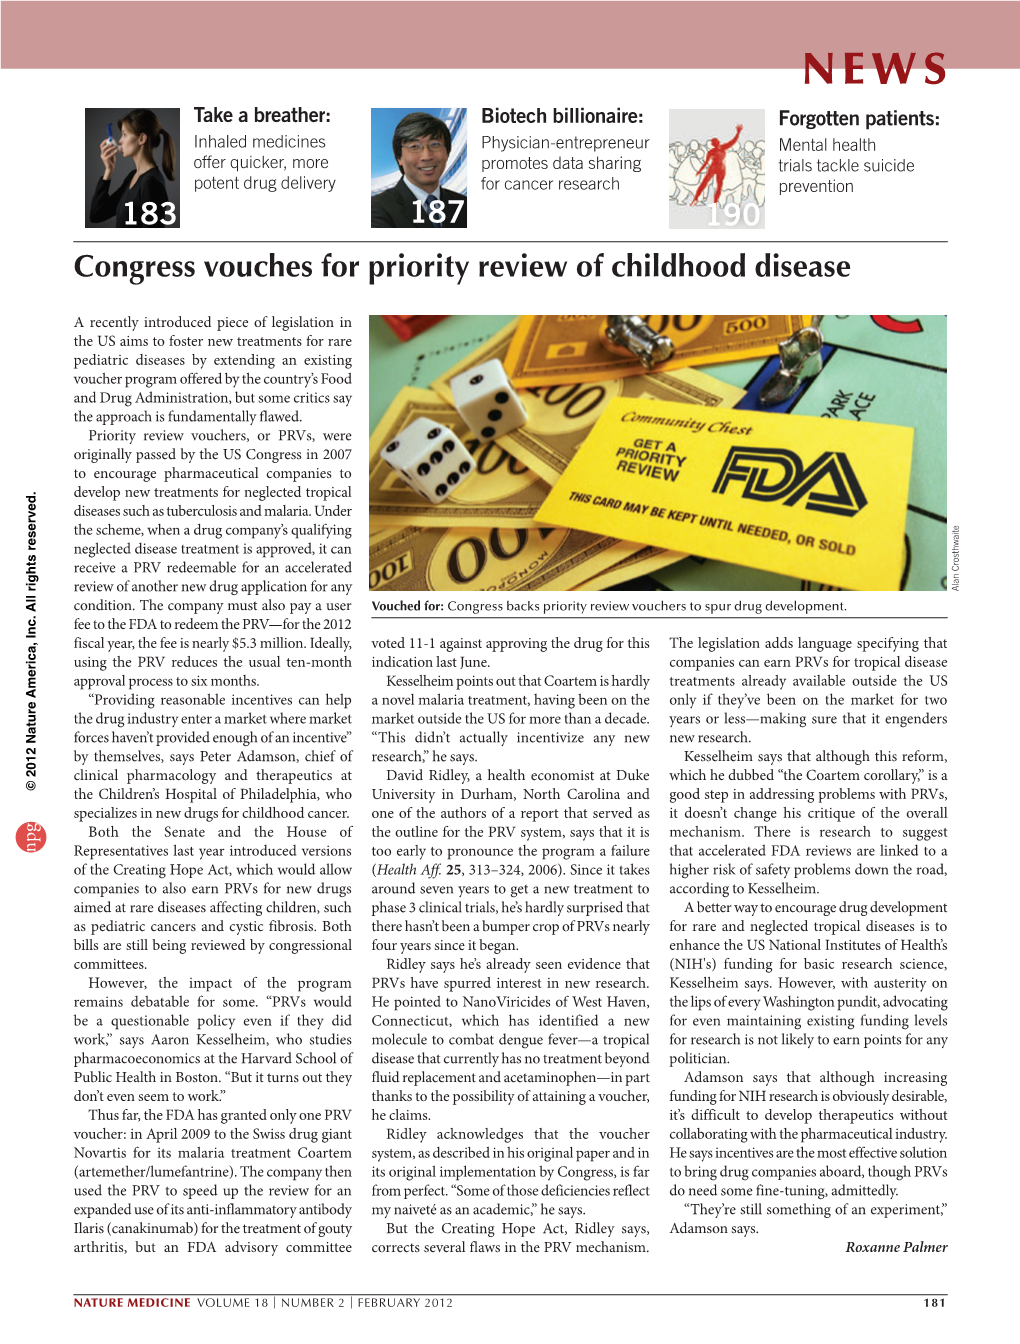 Congress Vouches for Priority Review of Childhood Disease